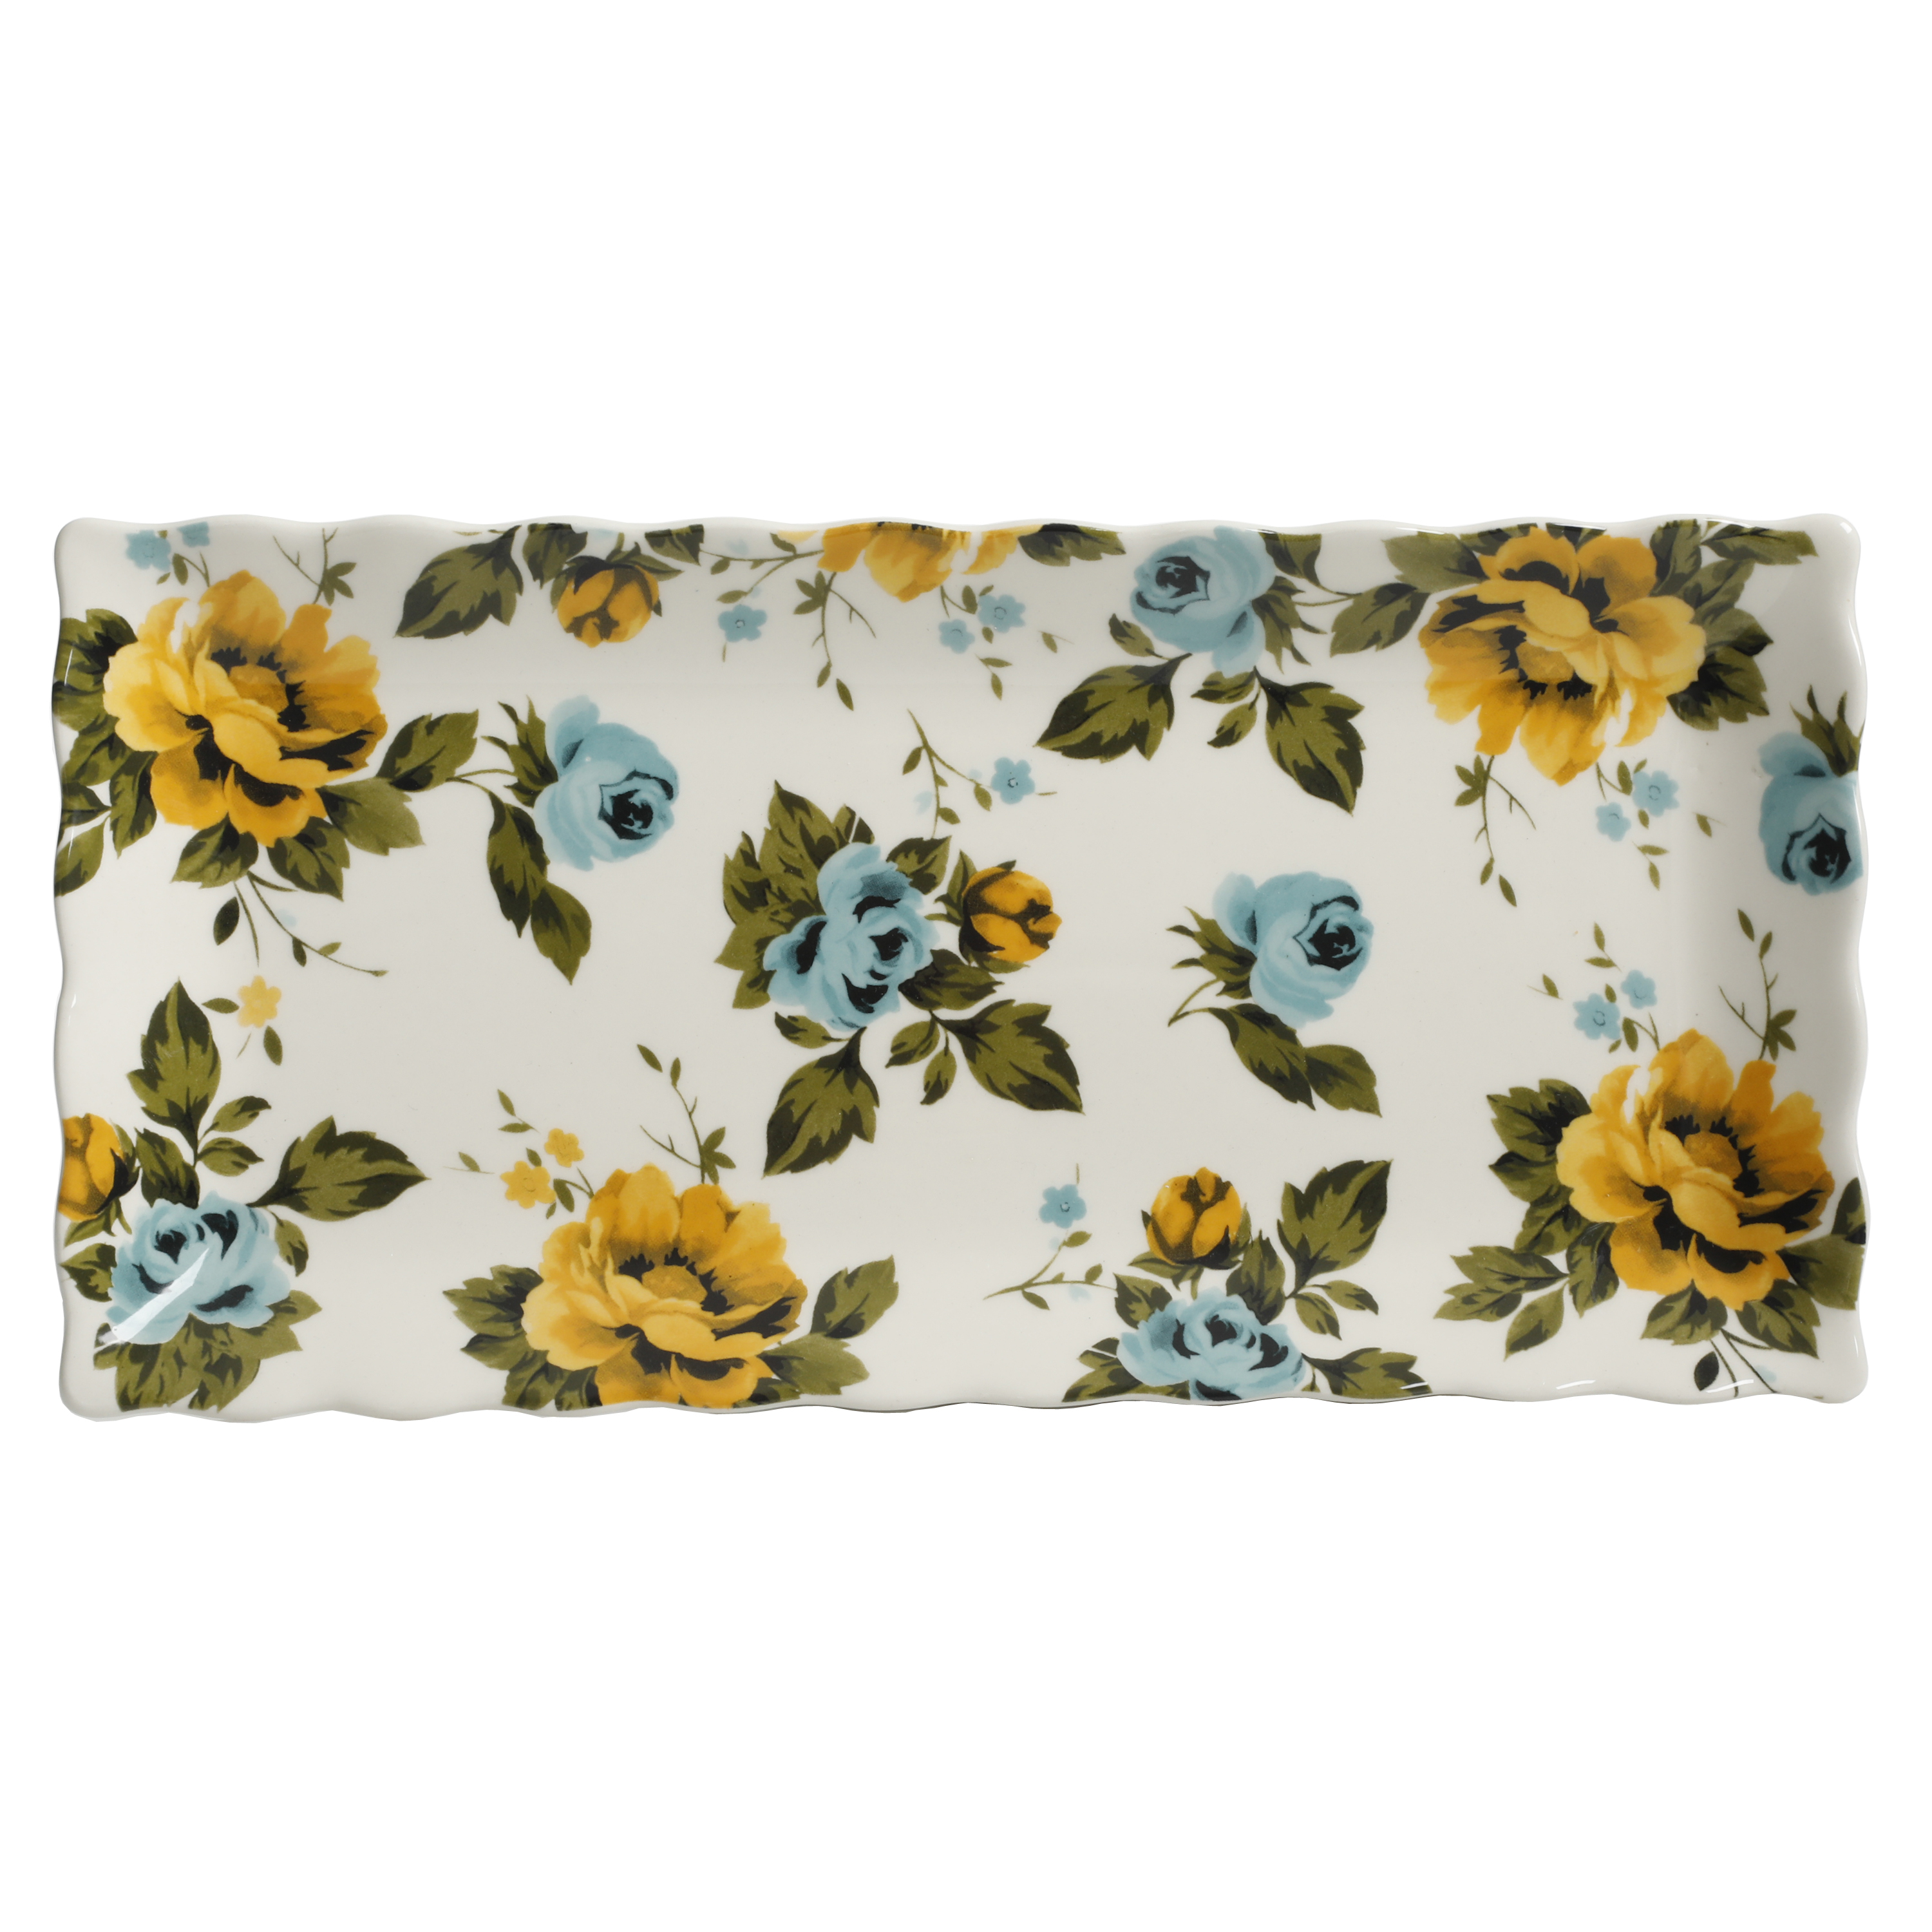 The Pioneer Woman Floral Medley 3-Piece Serving Platters - image 4 of 8